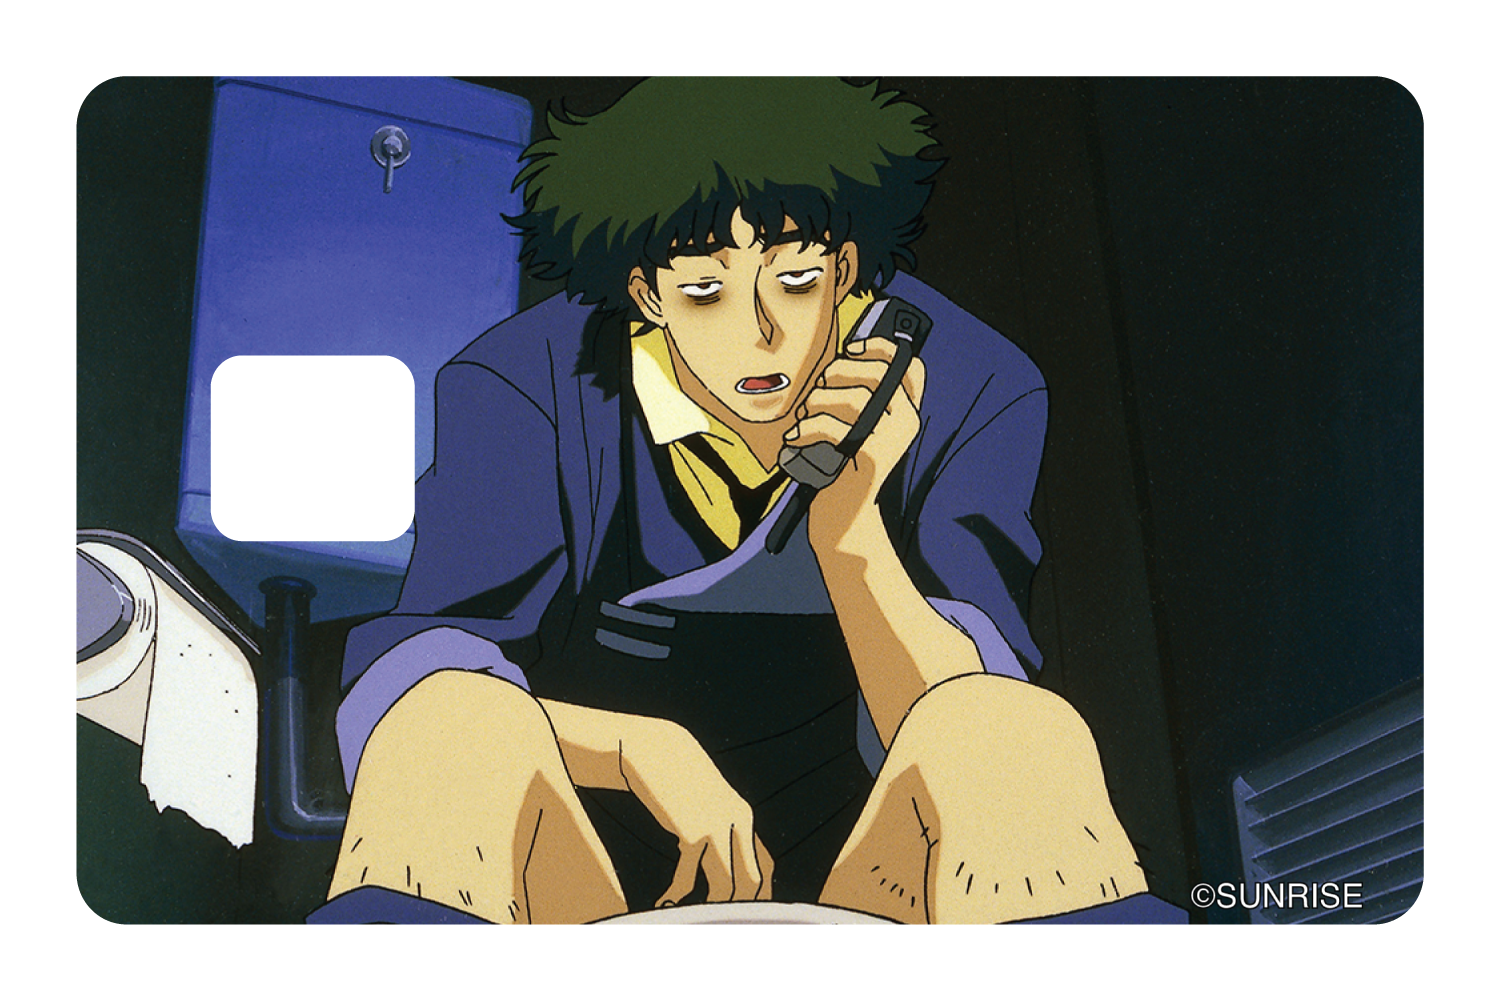 Spike on the toilet - Card Covers - Cowboy Bebop - CUCU Covers